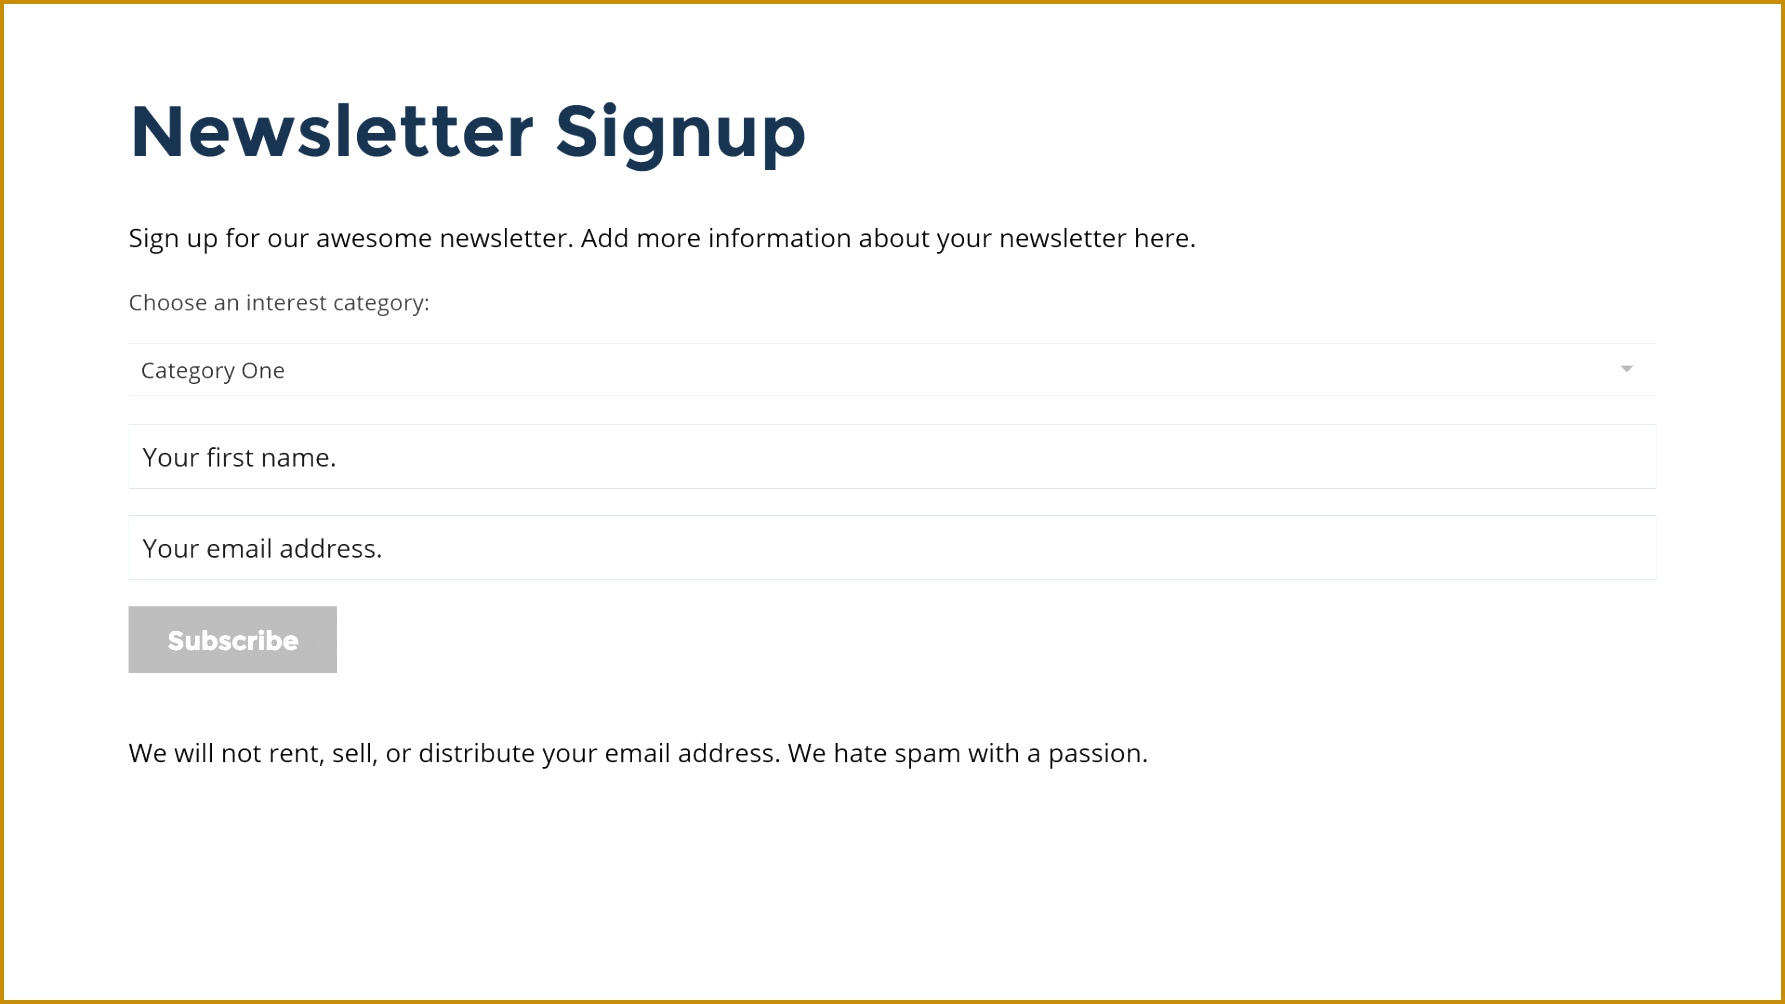 Newsletter Signup Form Template by Ajax Newsletter Signup Form With Auto List Builder Net 17851004